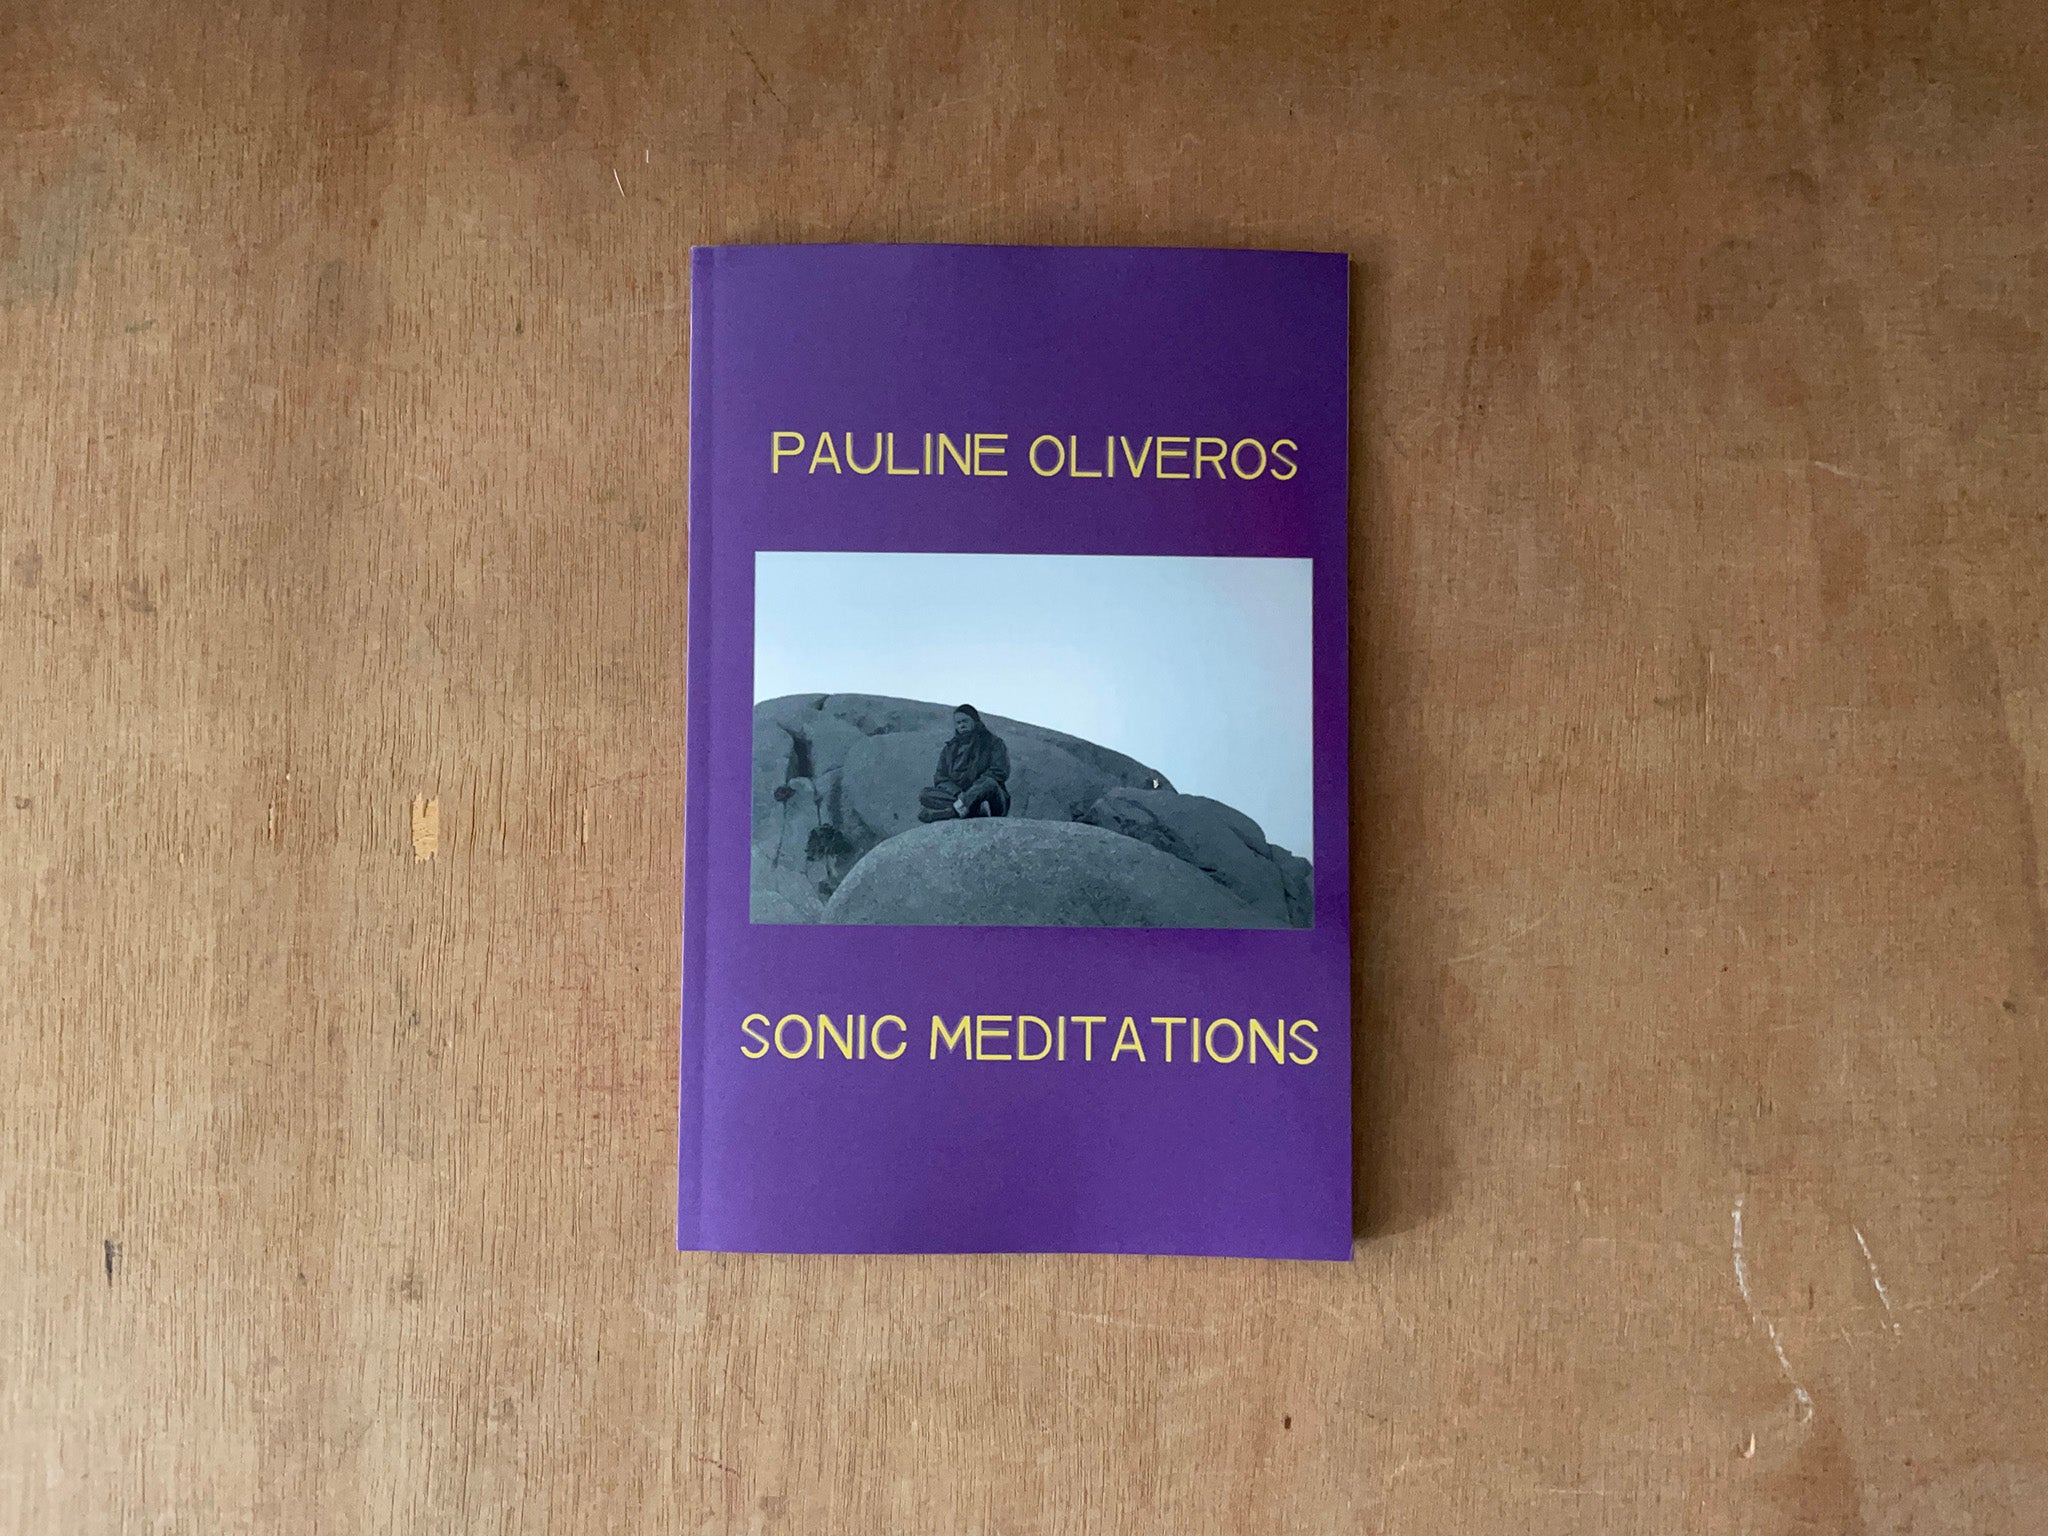 SONIC MEDITATIONS by Pauline Oliveros